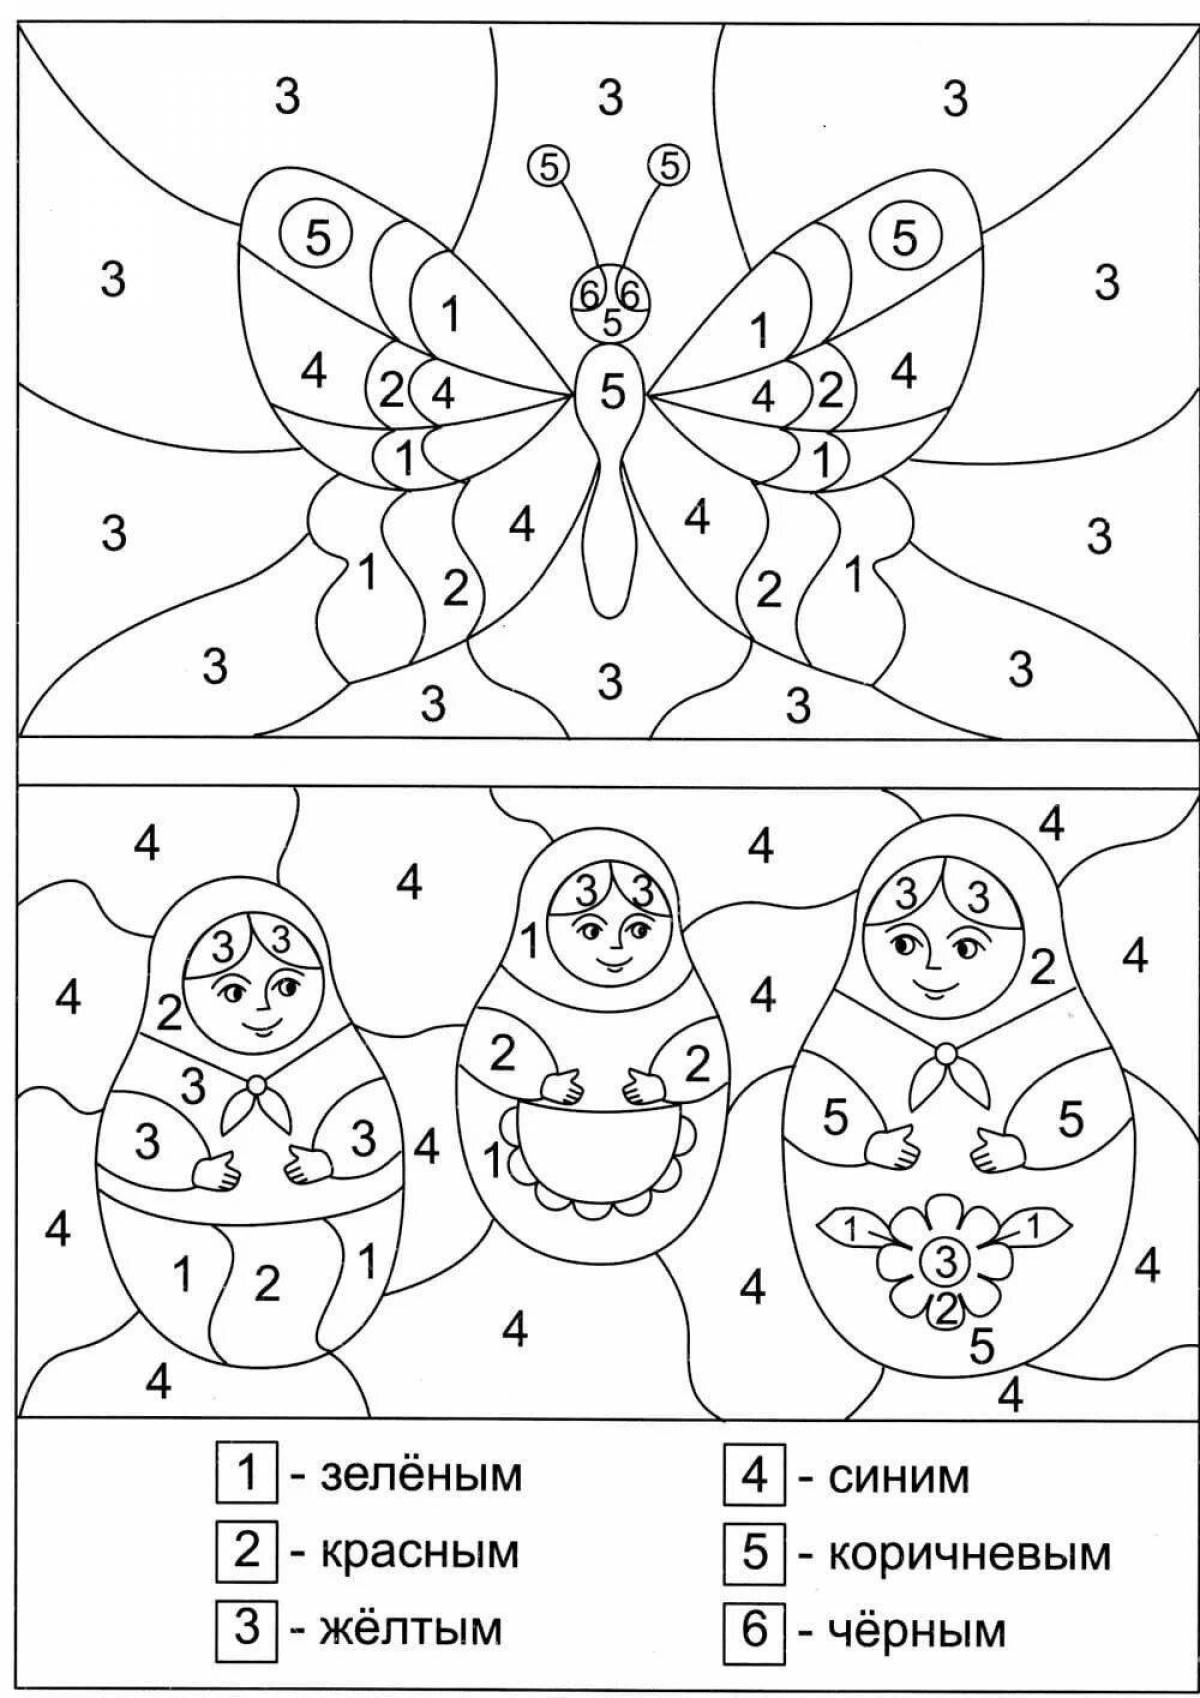 Fun coloring by numbers up to 5